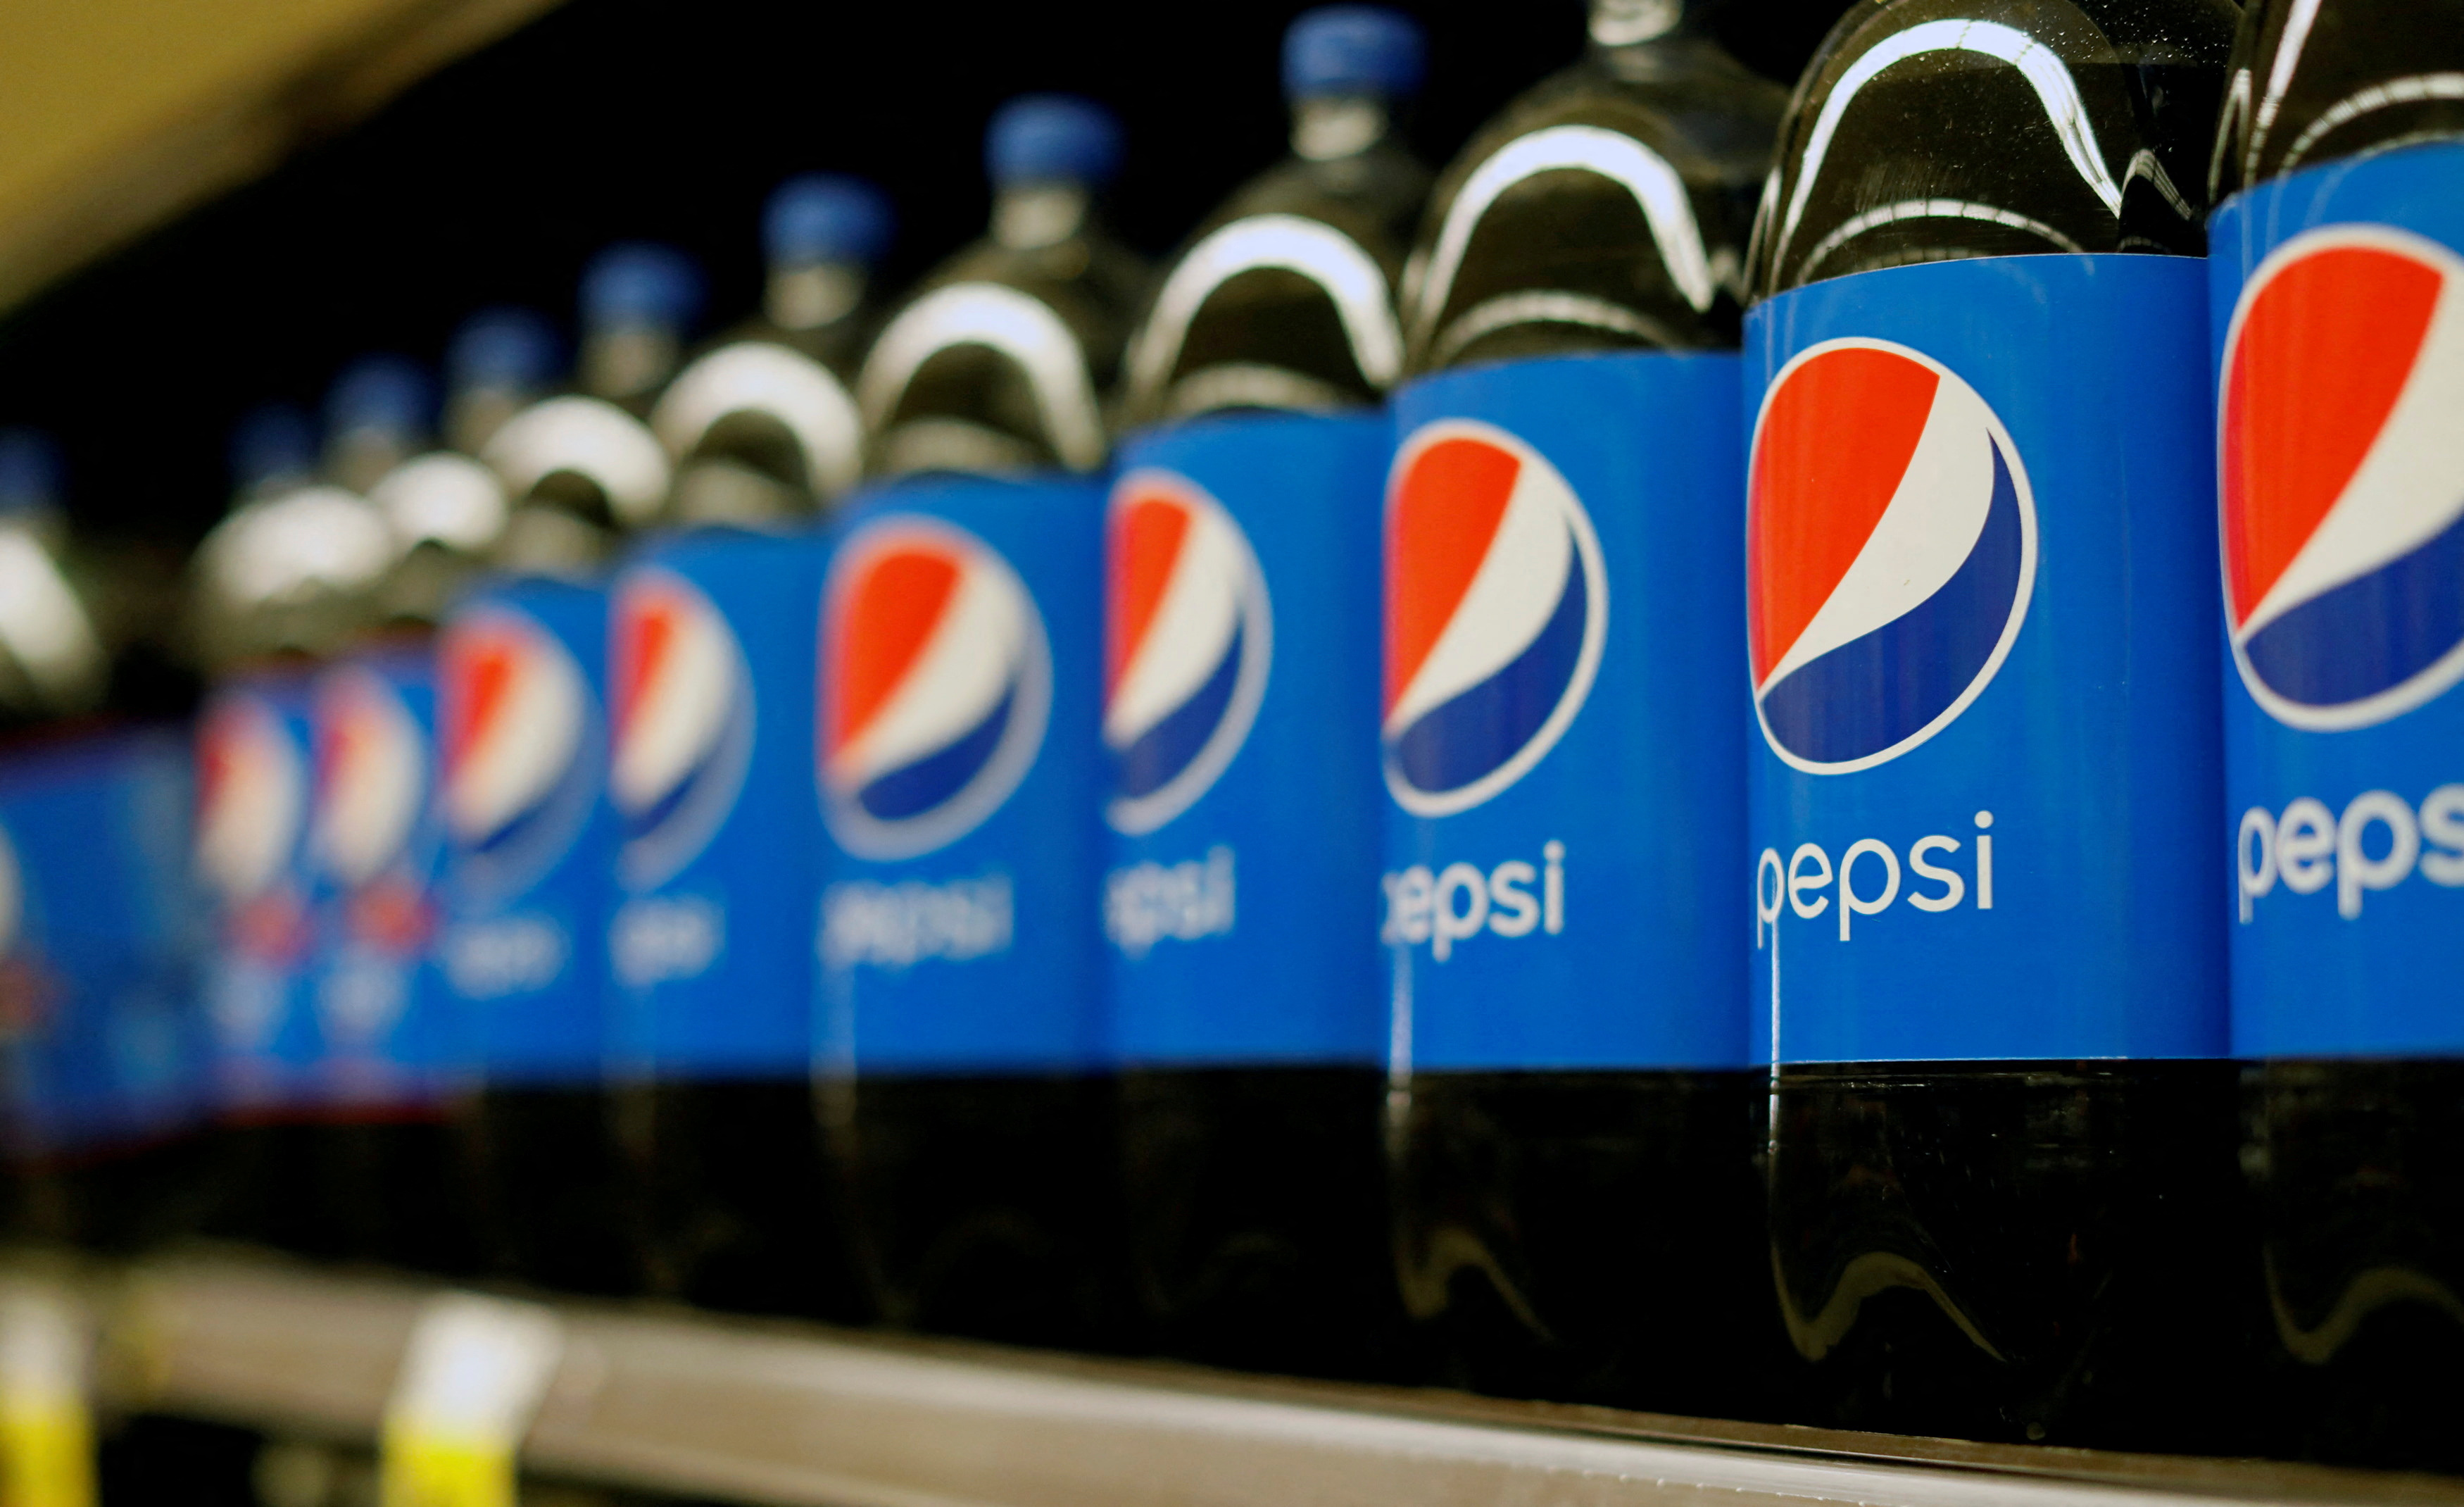 Bottles of Pepsi are pictured at a grocery store in Pasadena